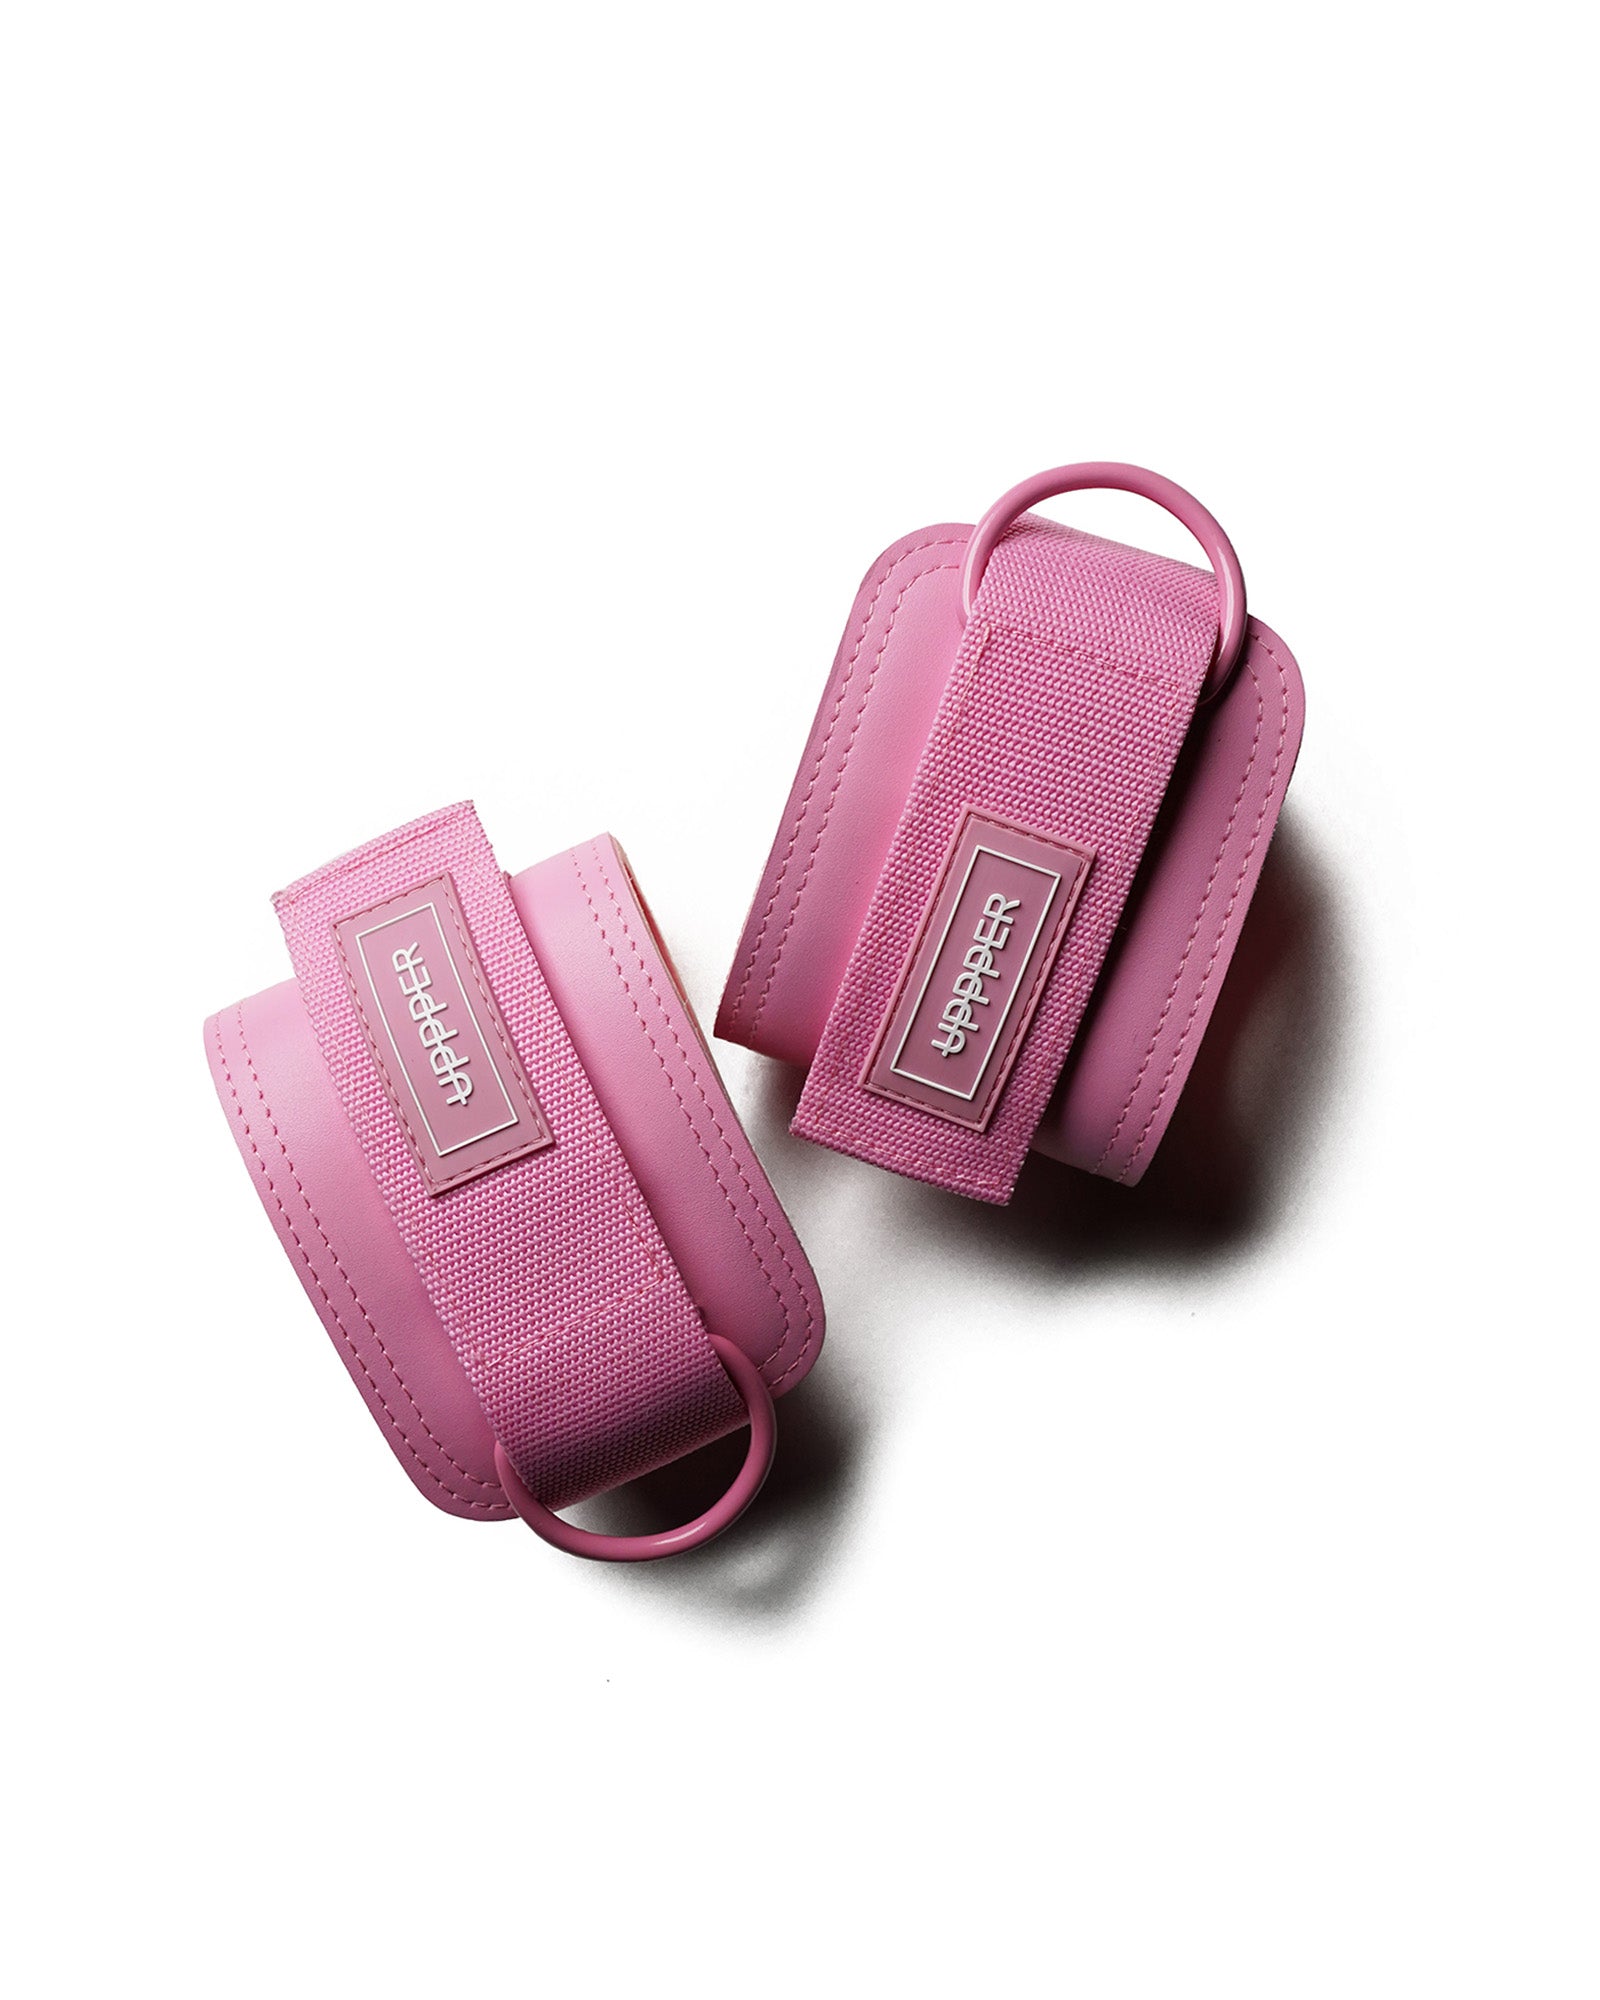 Ankle Straps Pink – UPPPER Gear